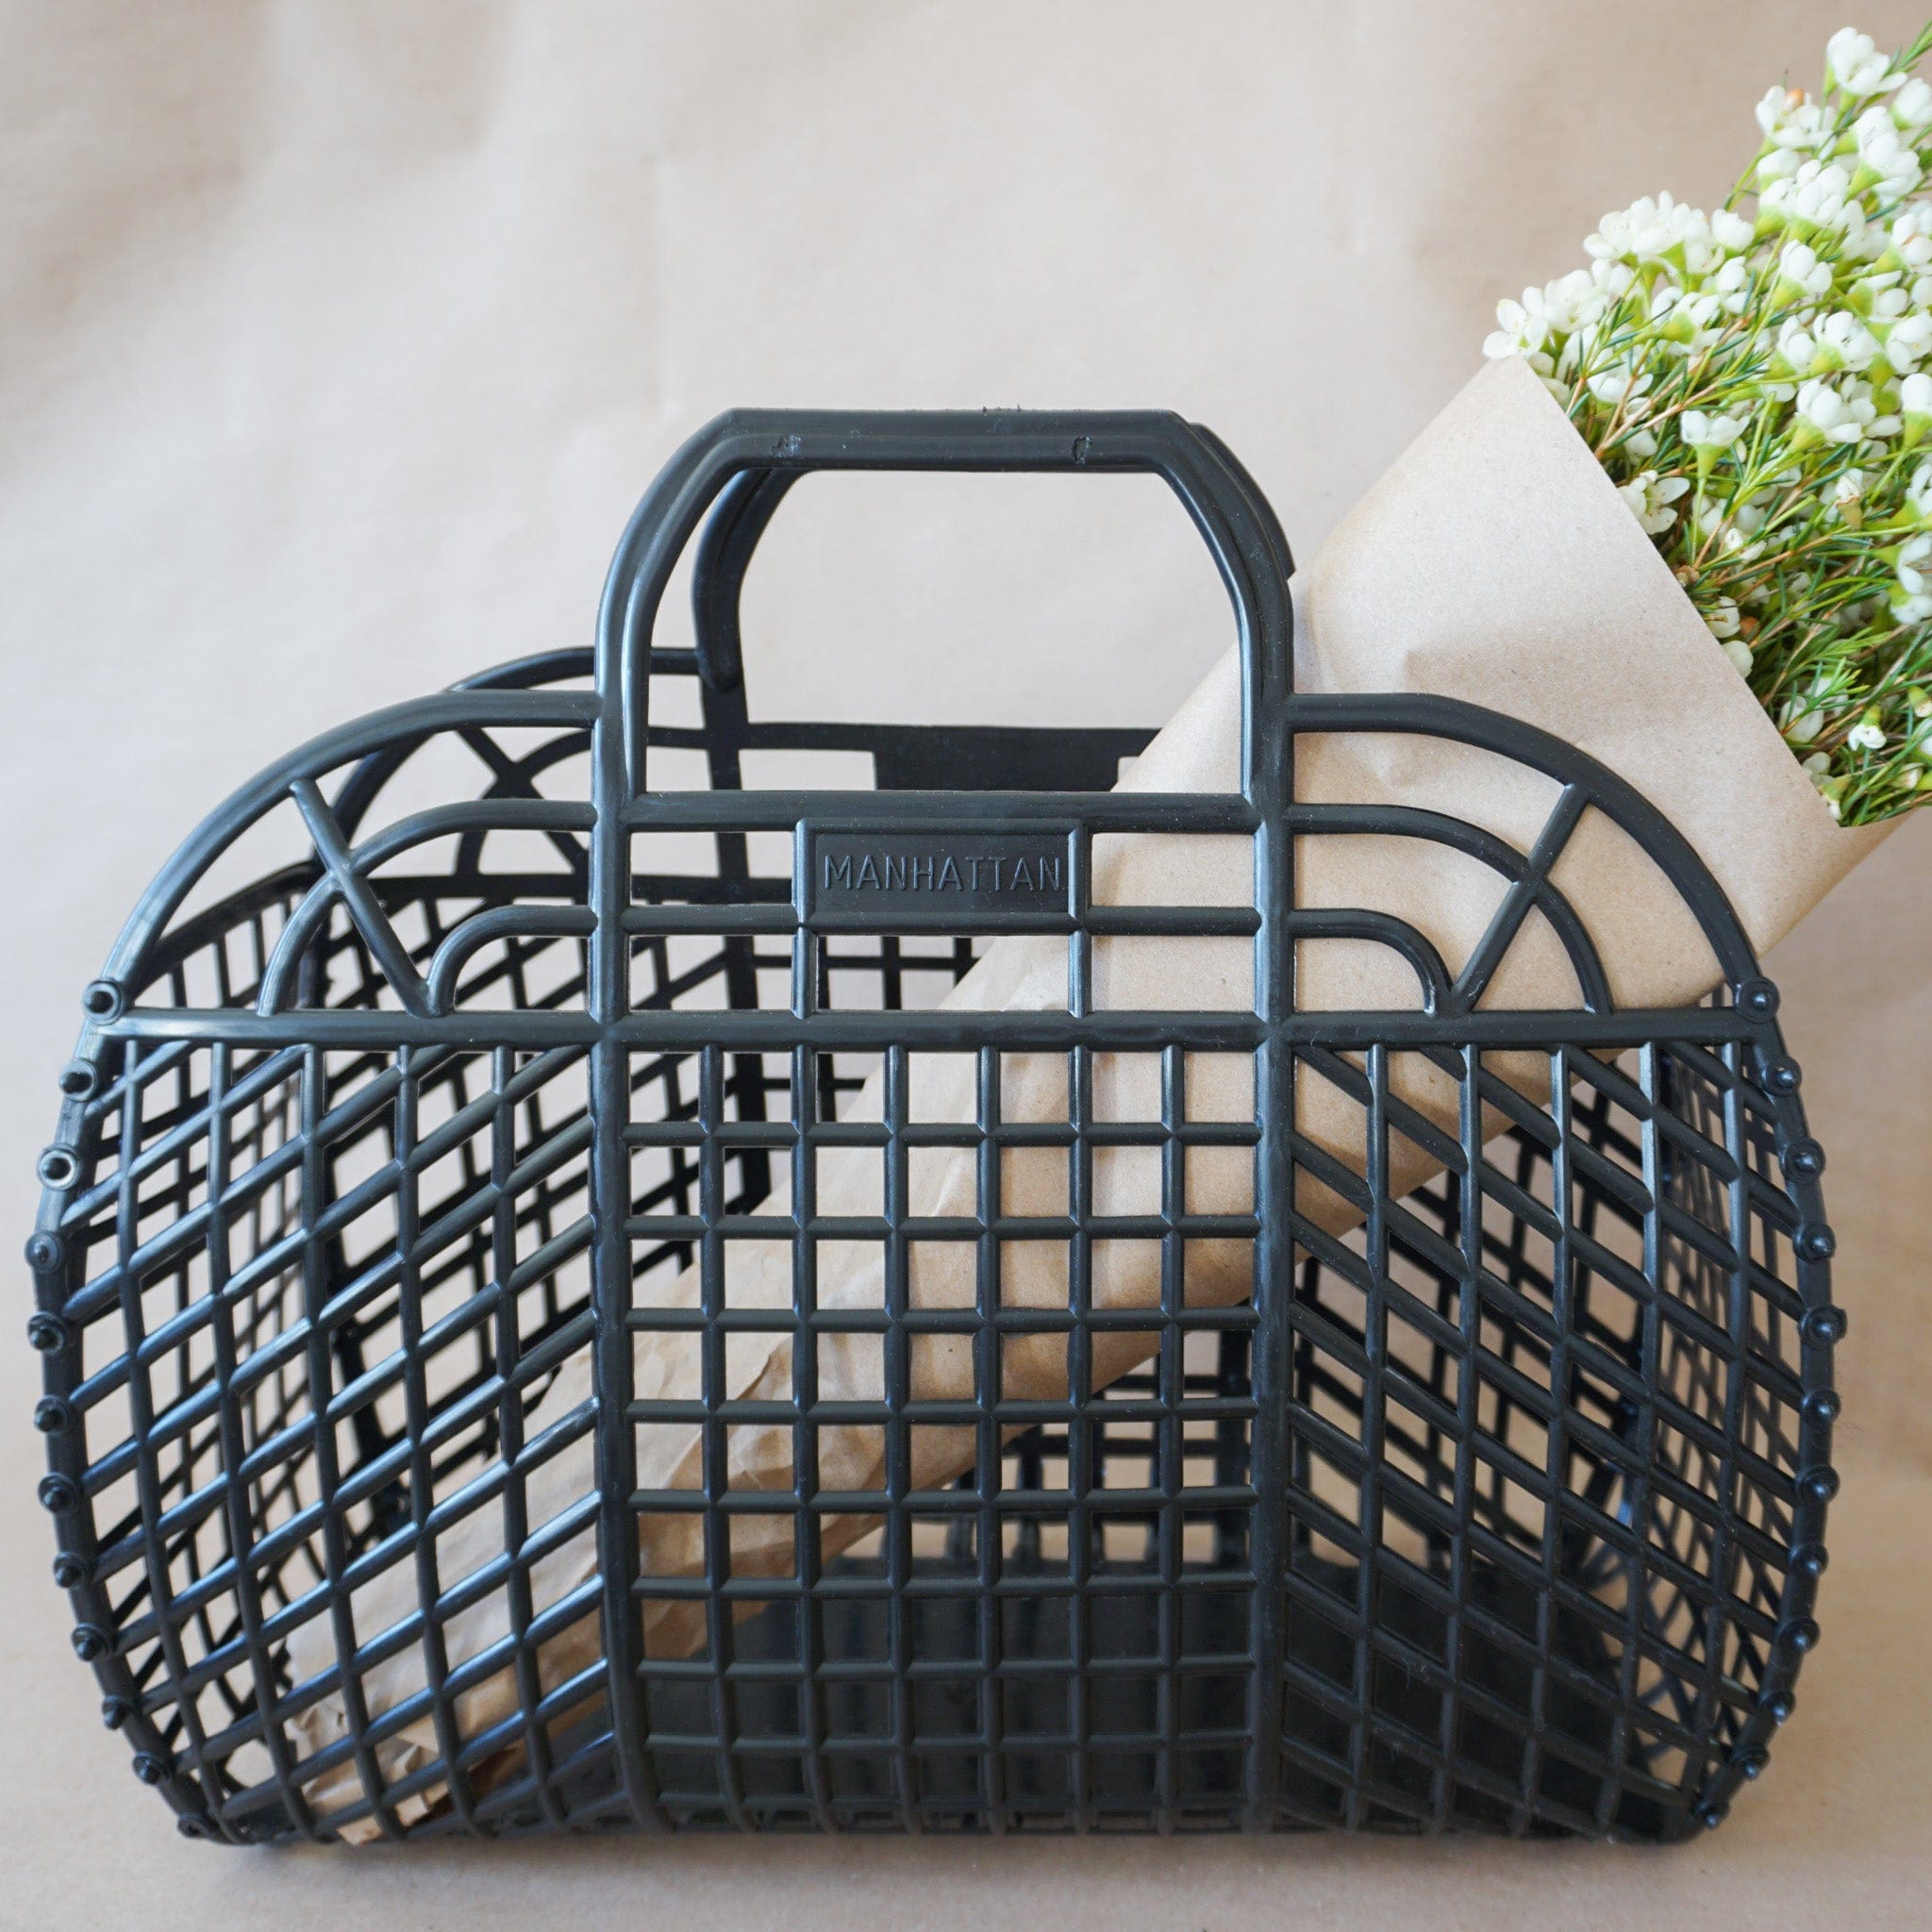 Ok-International Containers/ Vases/Baskets/Trays Collapsable Carryall Basket w/ Handles